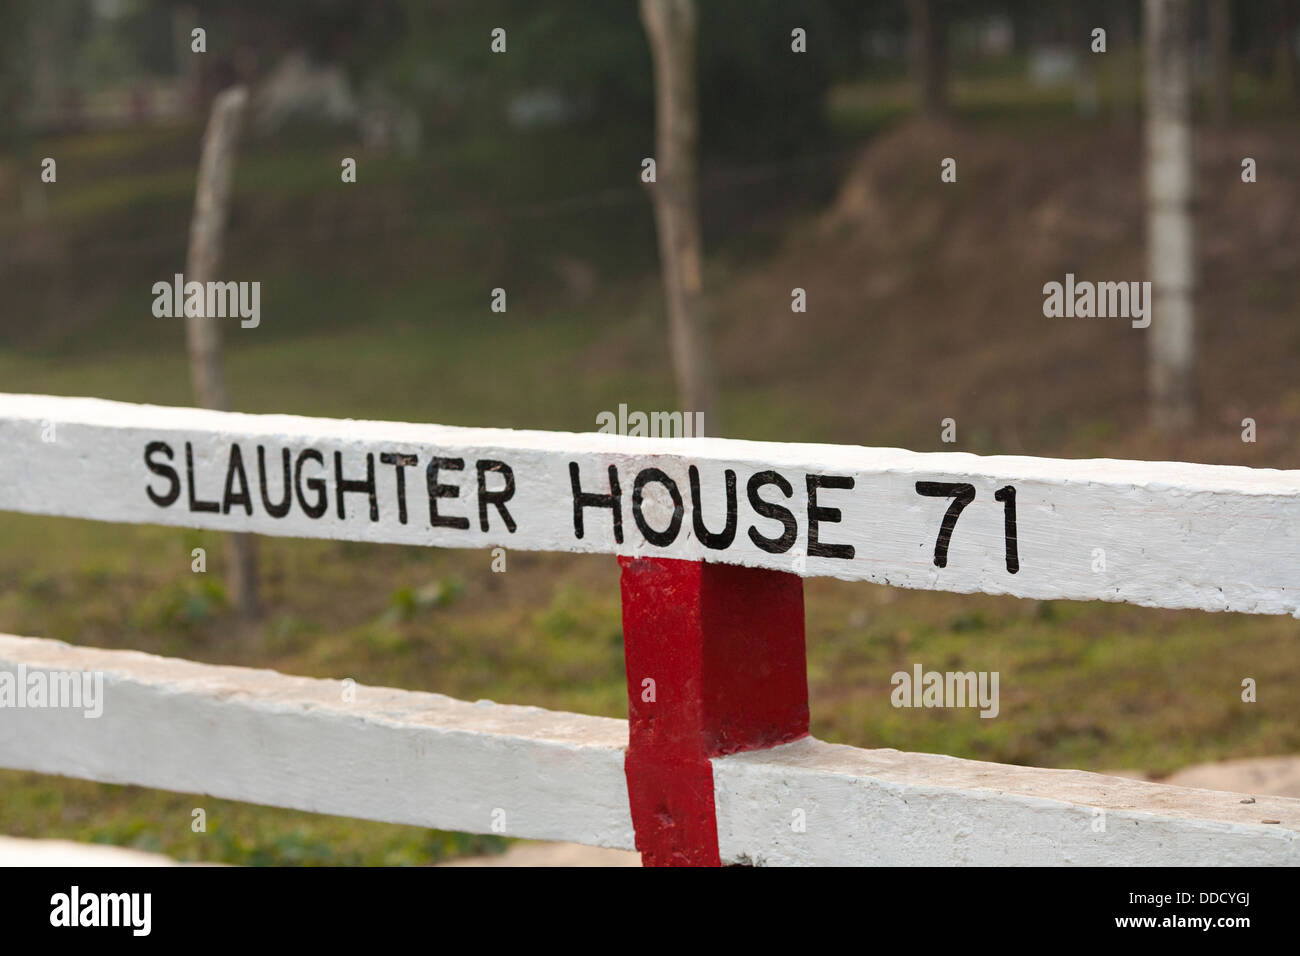 A sign slaughter house 71 a reference to the Bangladeshi war of independence in 1971 in Srimongol, Bangladesh Stock Photo